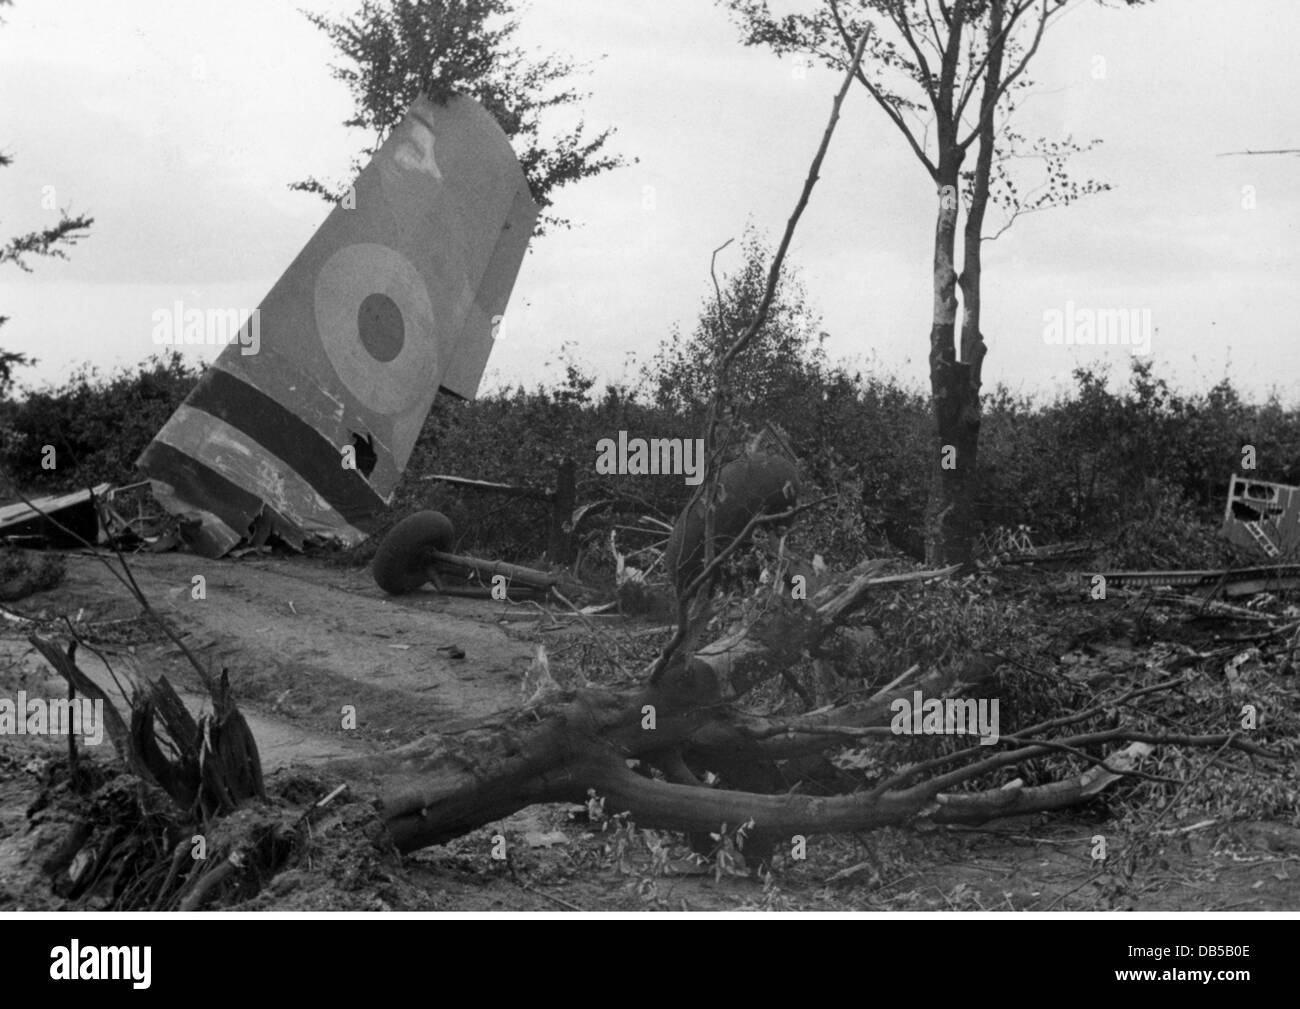 events, Second World War / WWII, Netherlands, Arnhem, 17. - 25.9.1944, crash landed military glider (Horsa) of the British 1st Airborne Division (General Urquhart), Additional-Rights-Clearences-Not Available Stock Photo